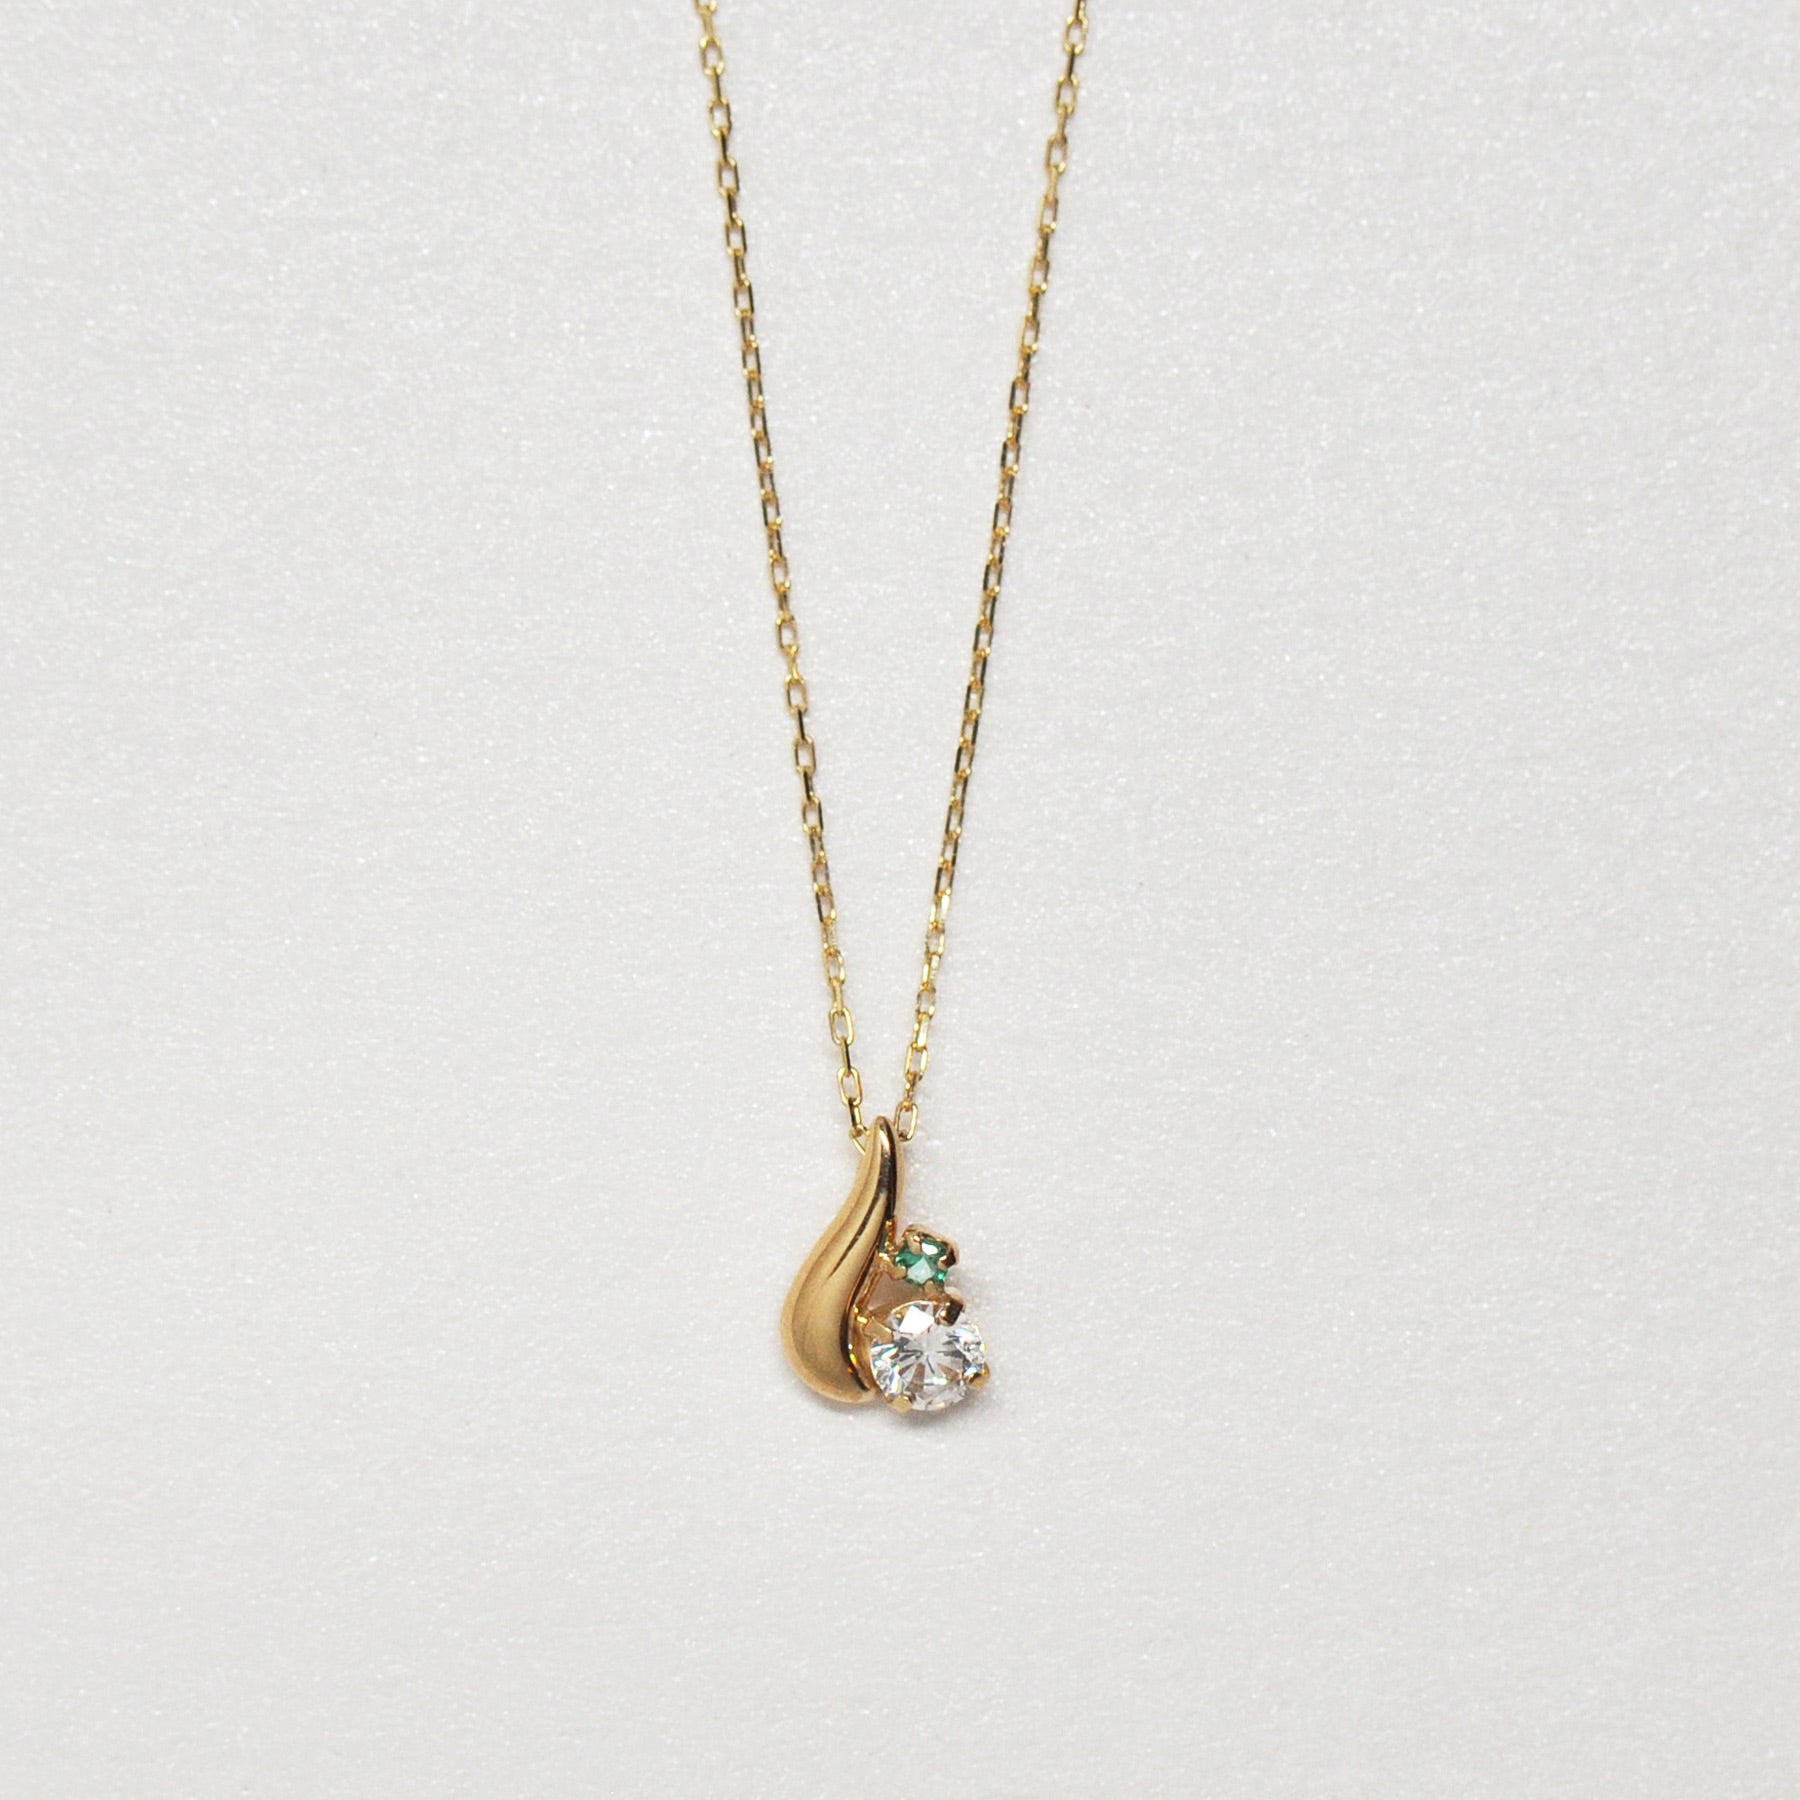 Simple Drop Necklace (10K Yellow Gold) - Product Image